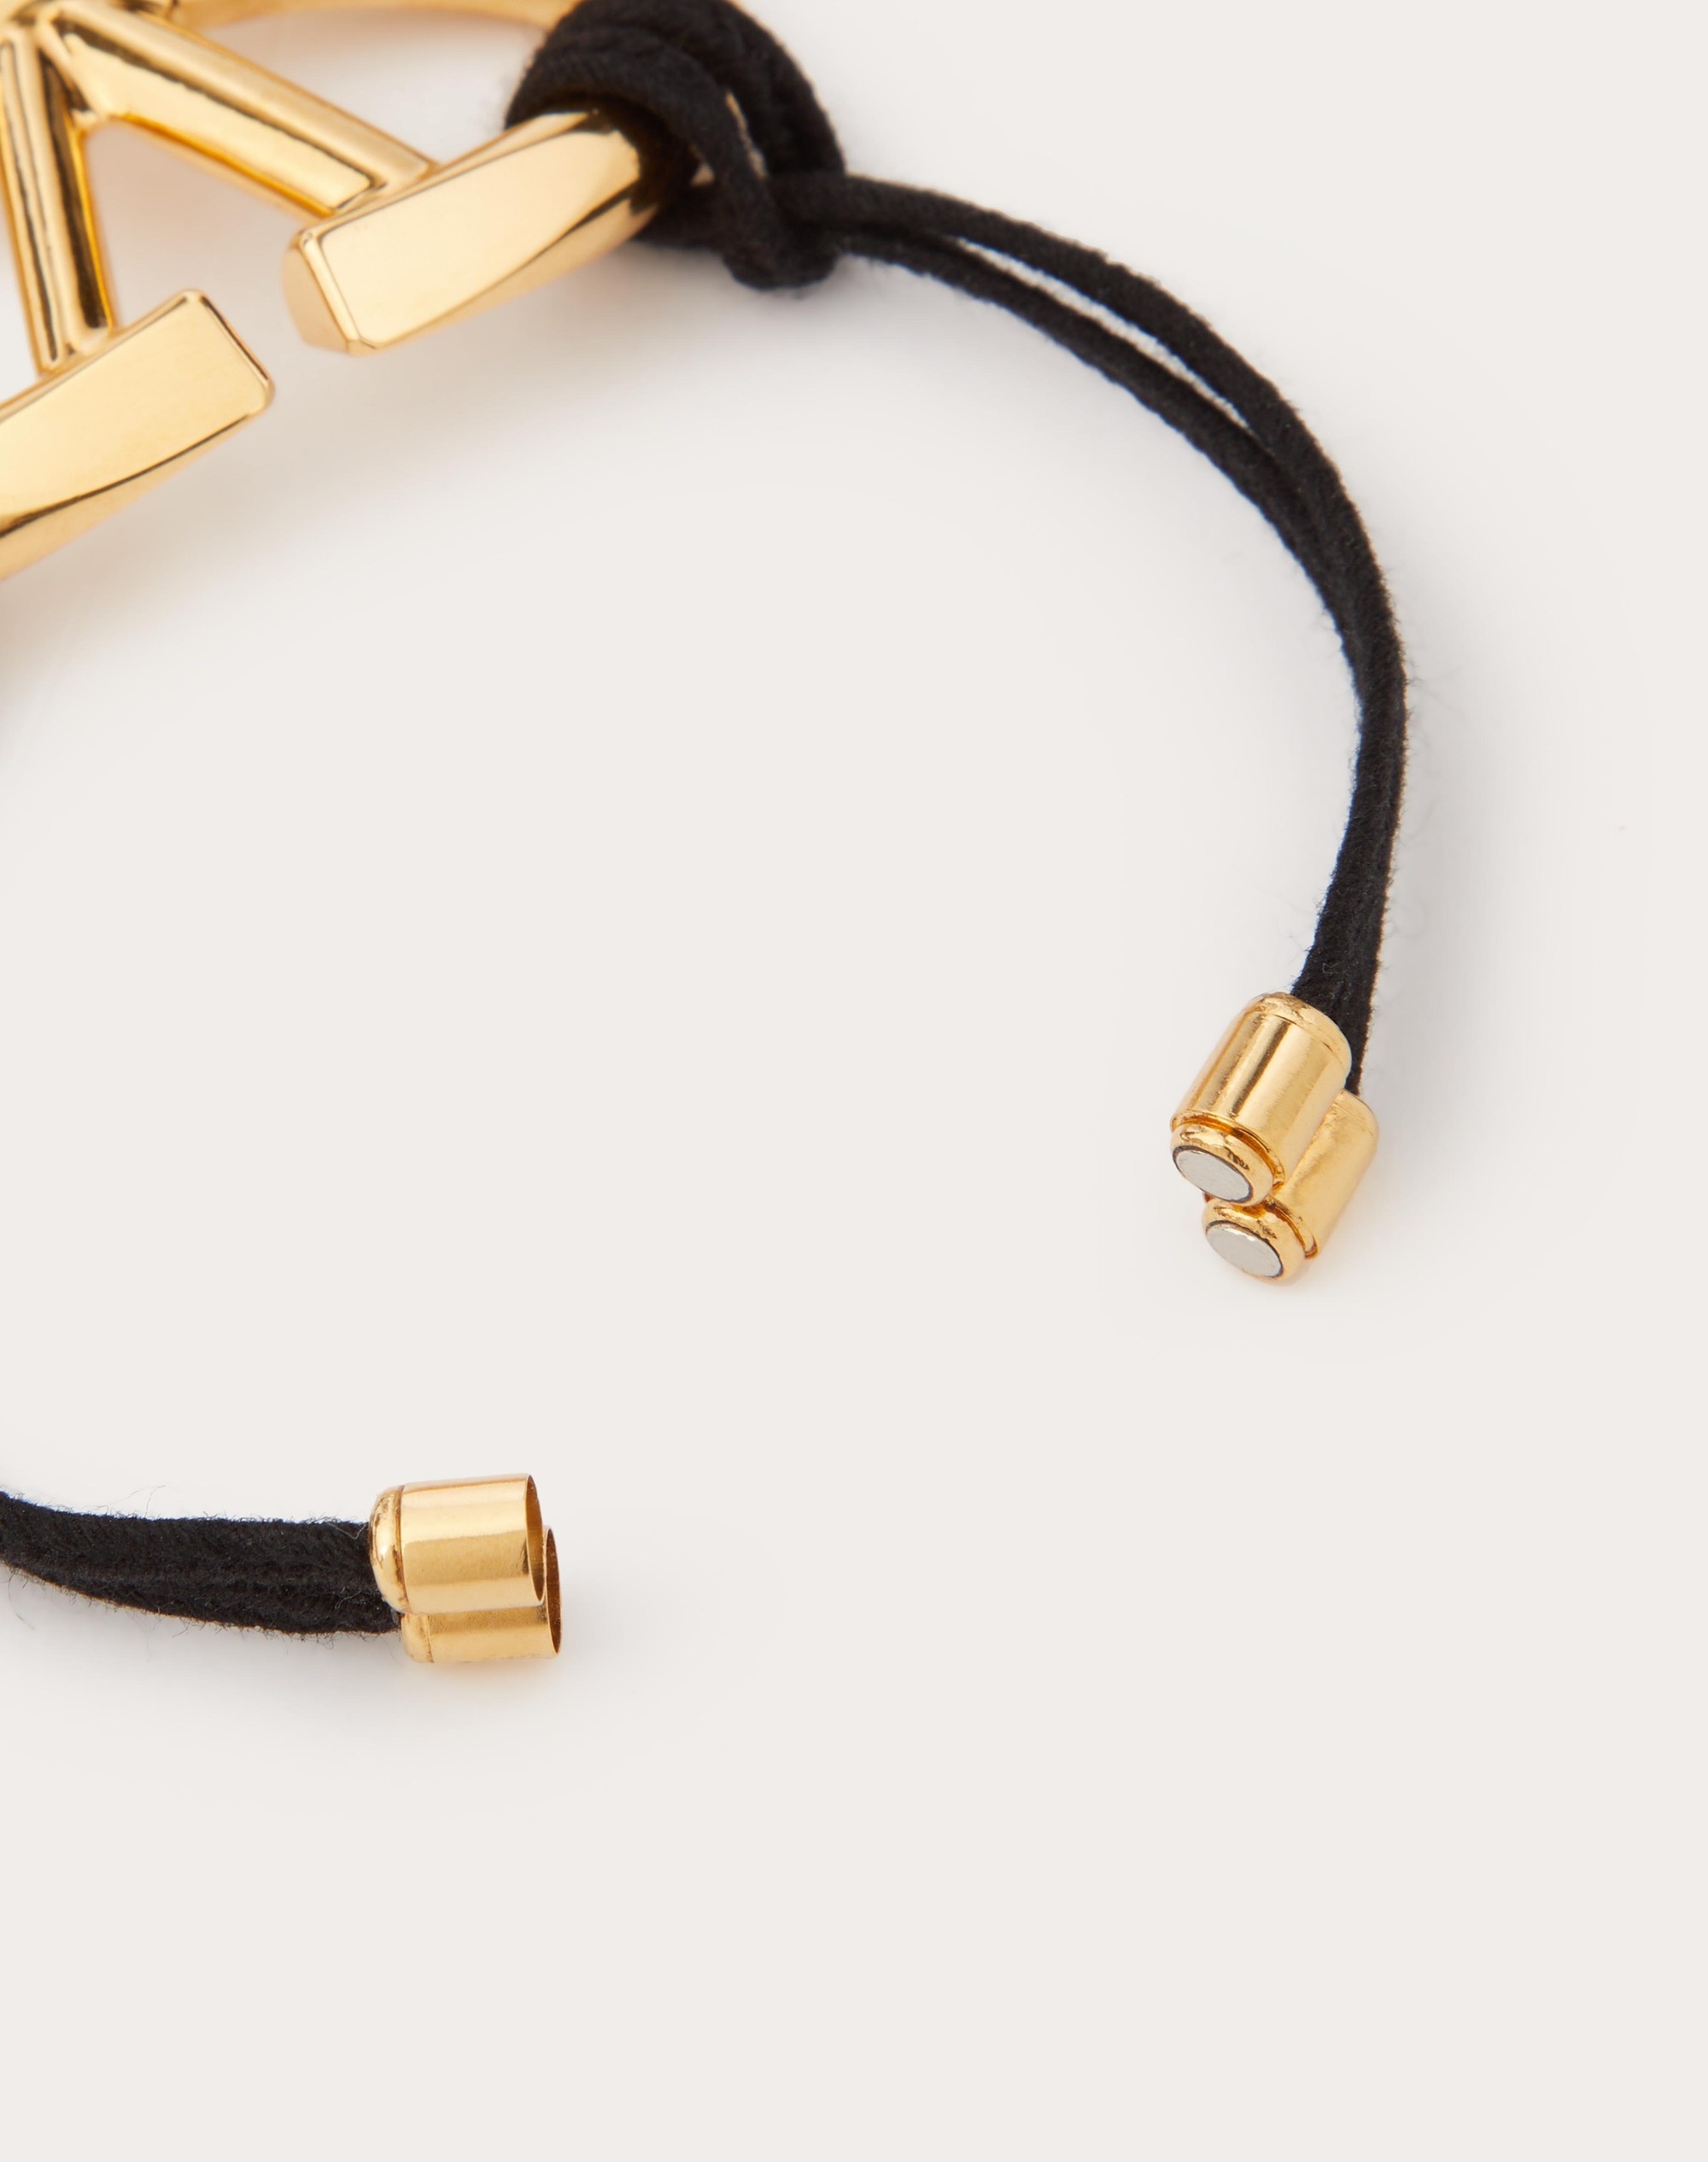 THE BOLD EDITION VLOGO ROPE AND METAL BRACELET - 4